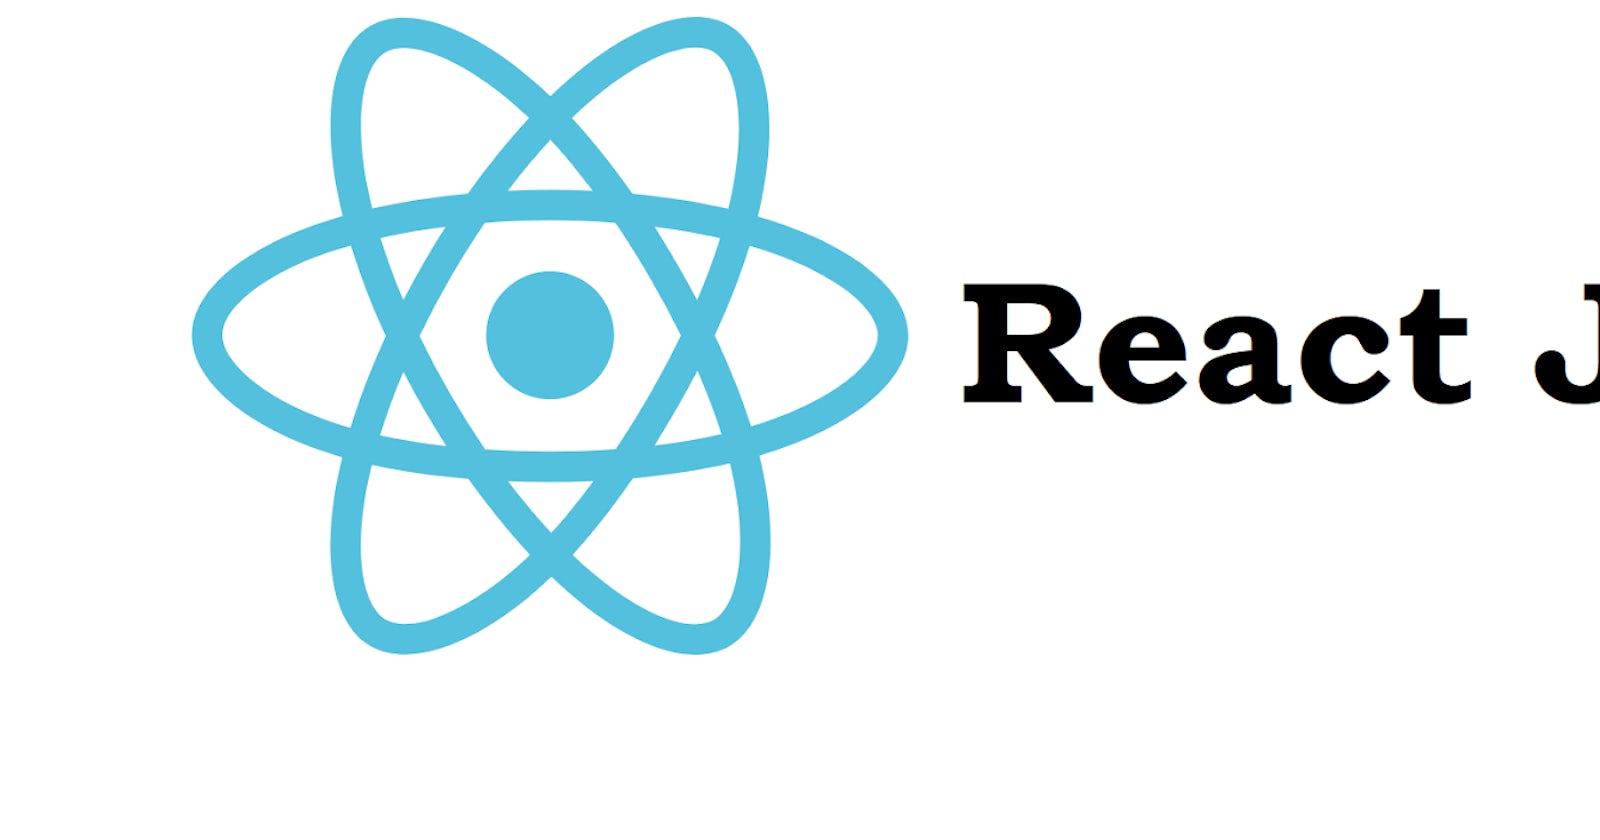 A Complete Beginner Guide To Learn and Get Started with React Js.